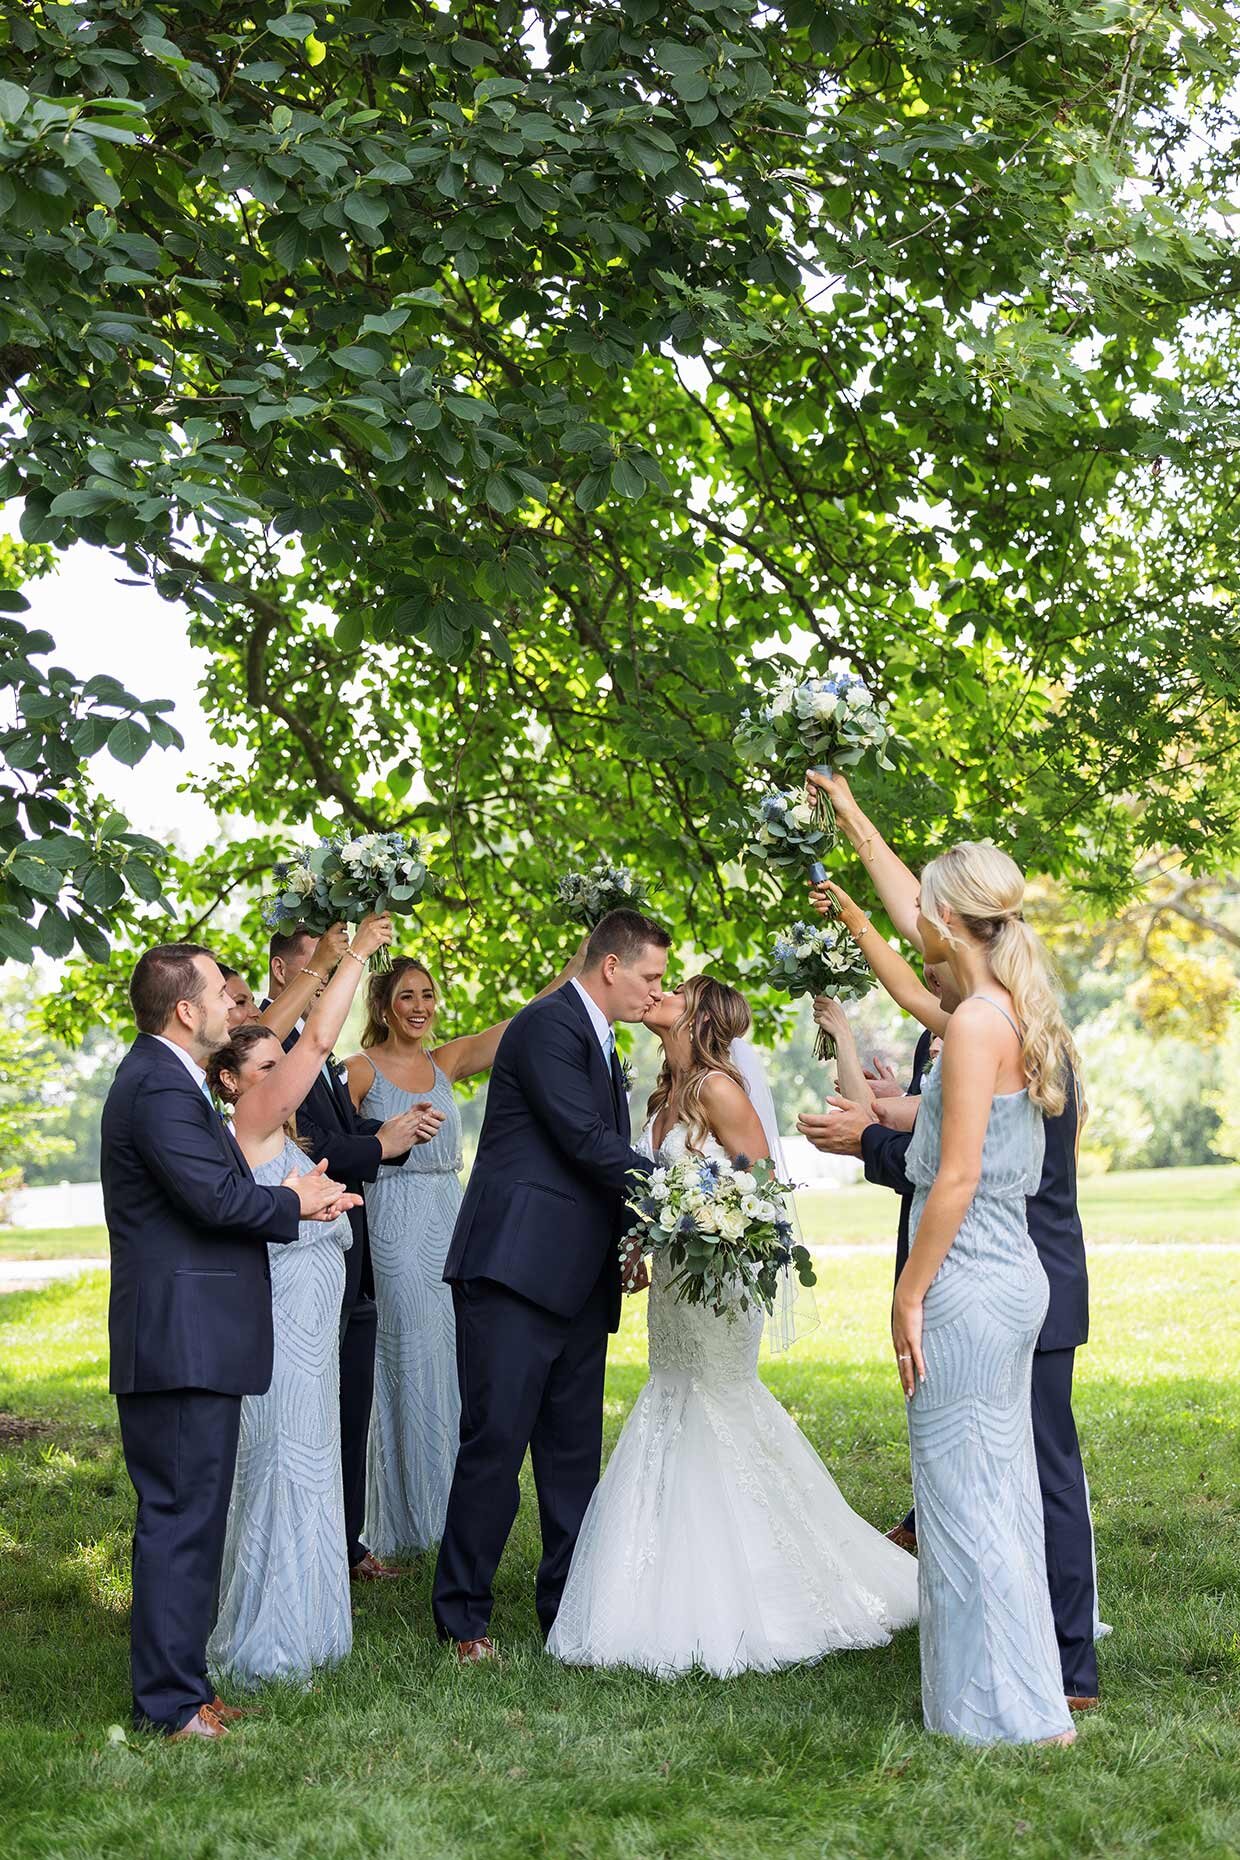 Bridal party celebrating bride and groom